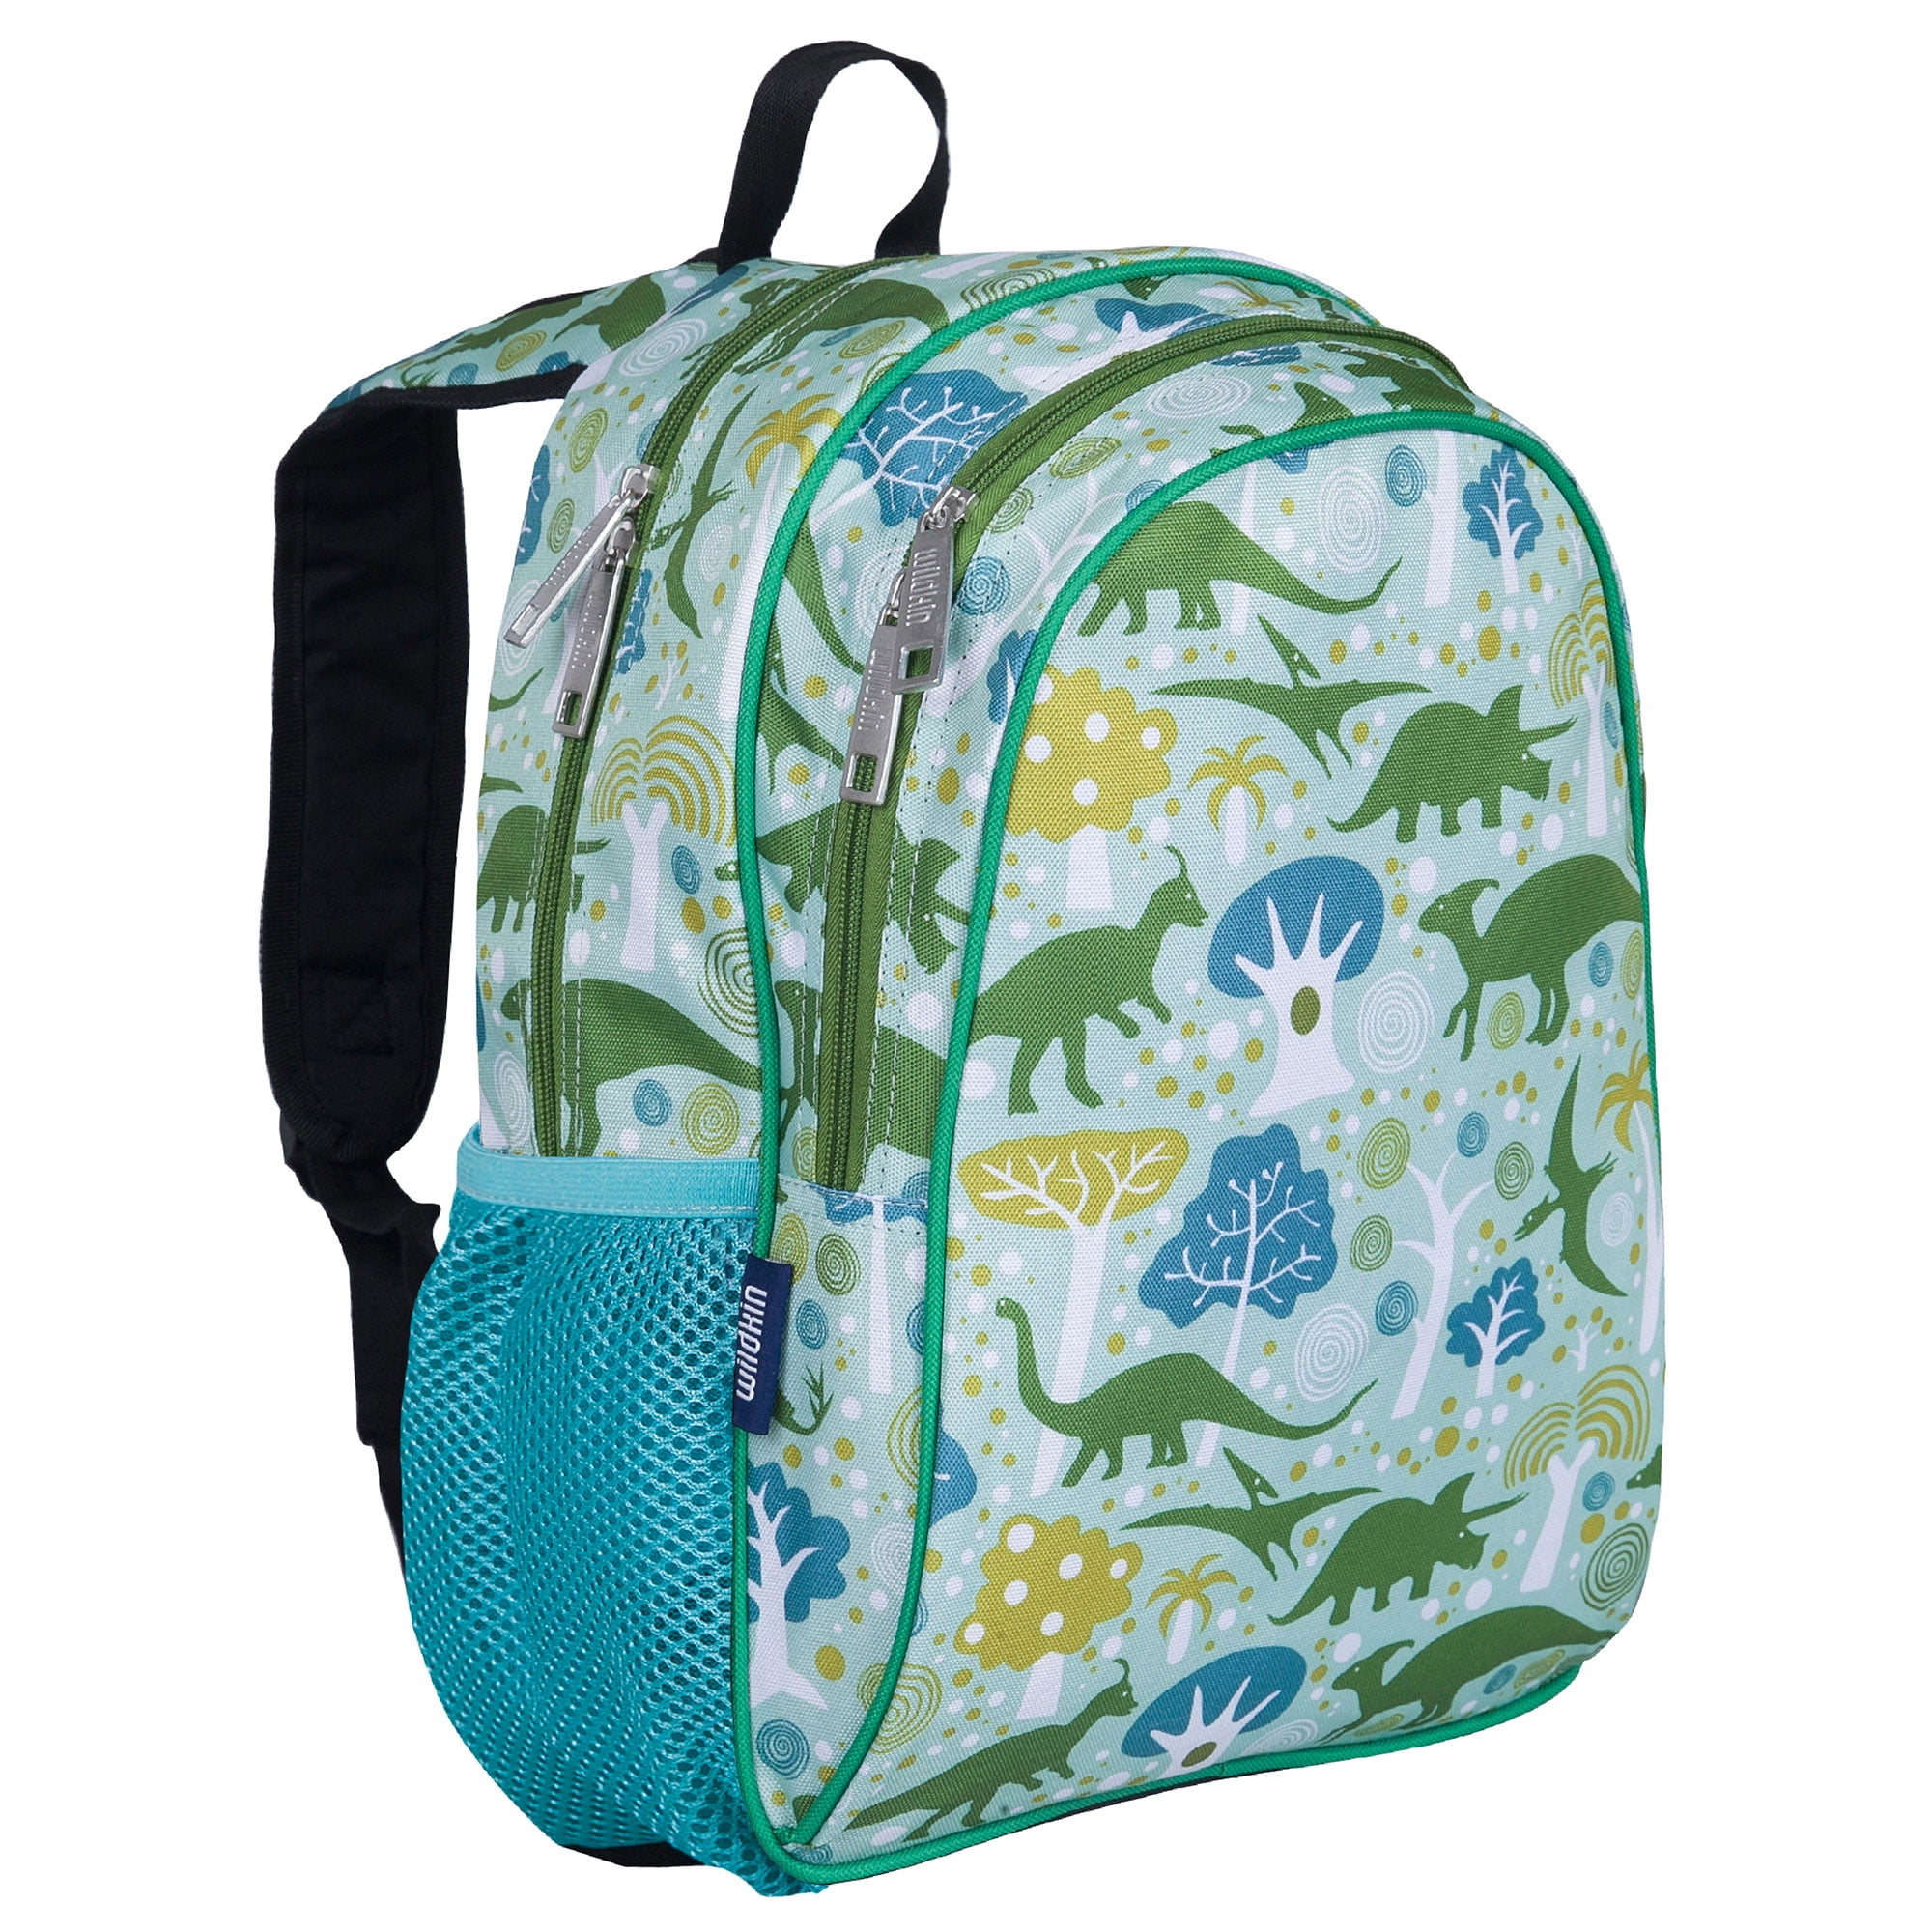 *NEW* Dino-Mite Insulated Lunch box Dinosaur Lunch bag Spiked Lunch Tote 